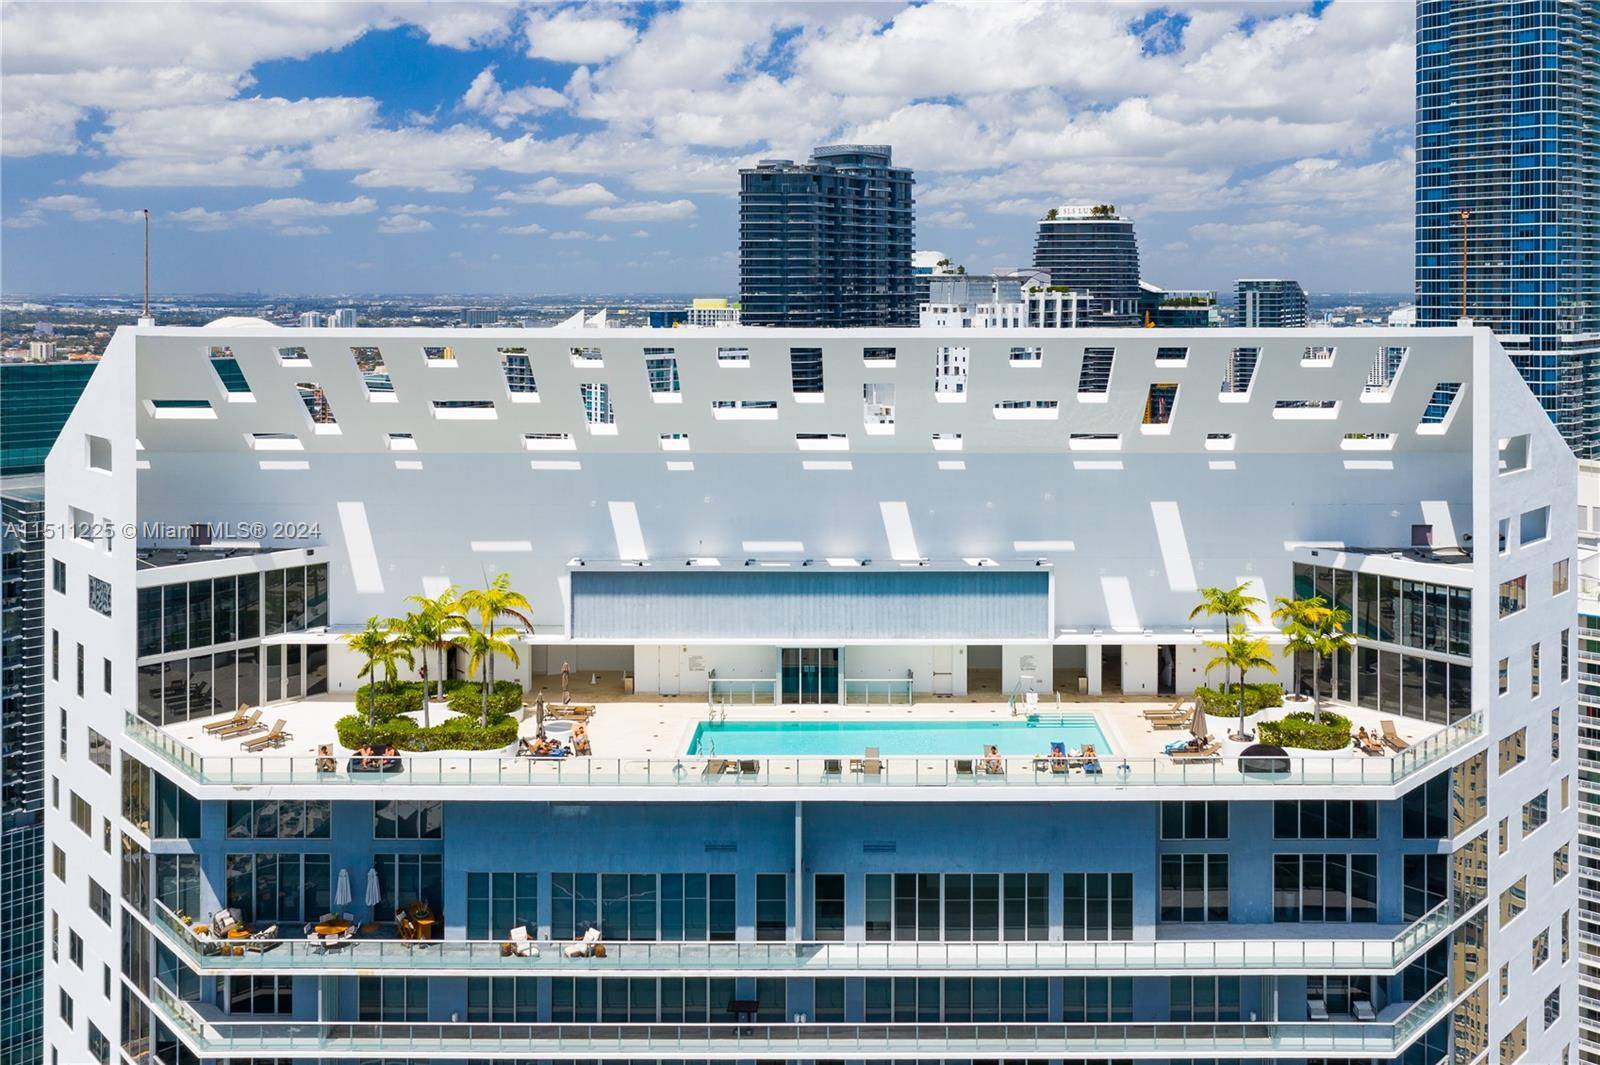 Introducing a tantalizing rooftop commercial opportunity at the desirable Brickell House condo in Miami.